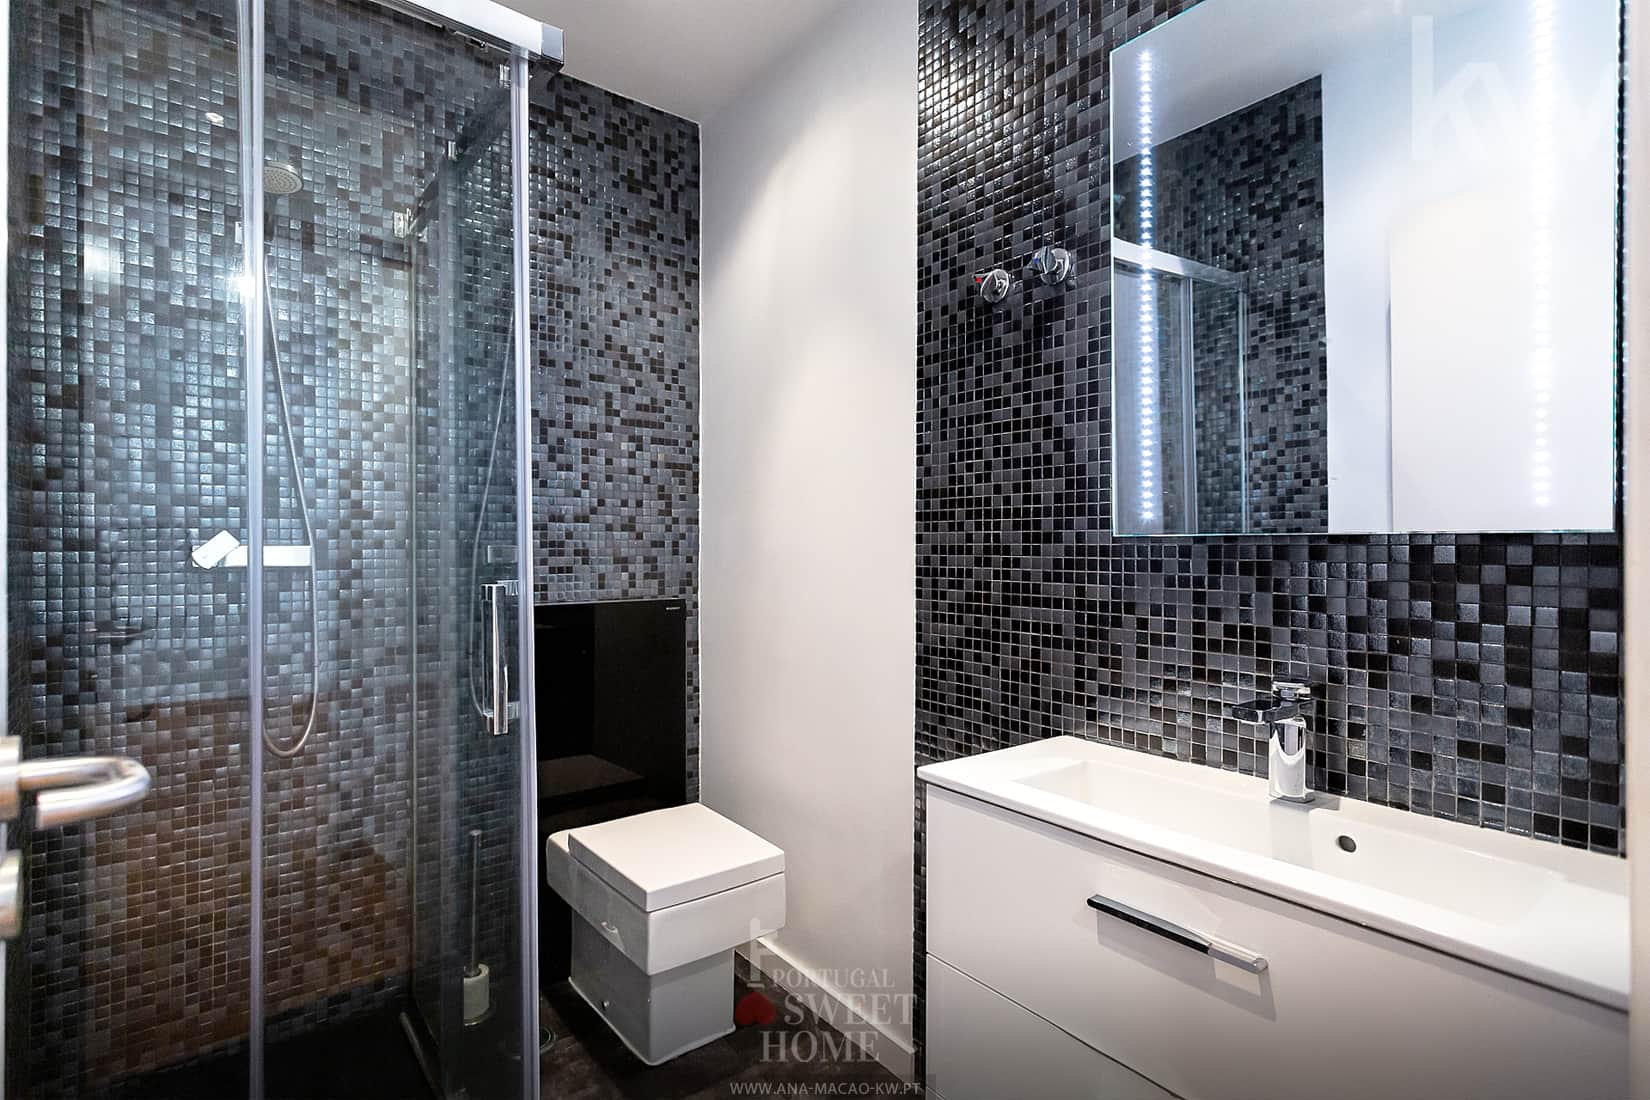 Bathroom (2.9 m2) renovated with shower